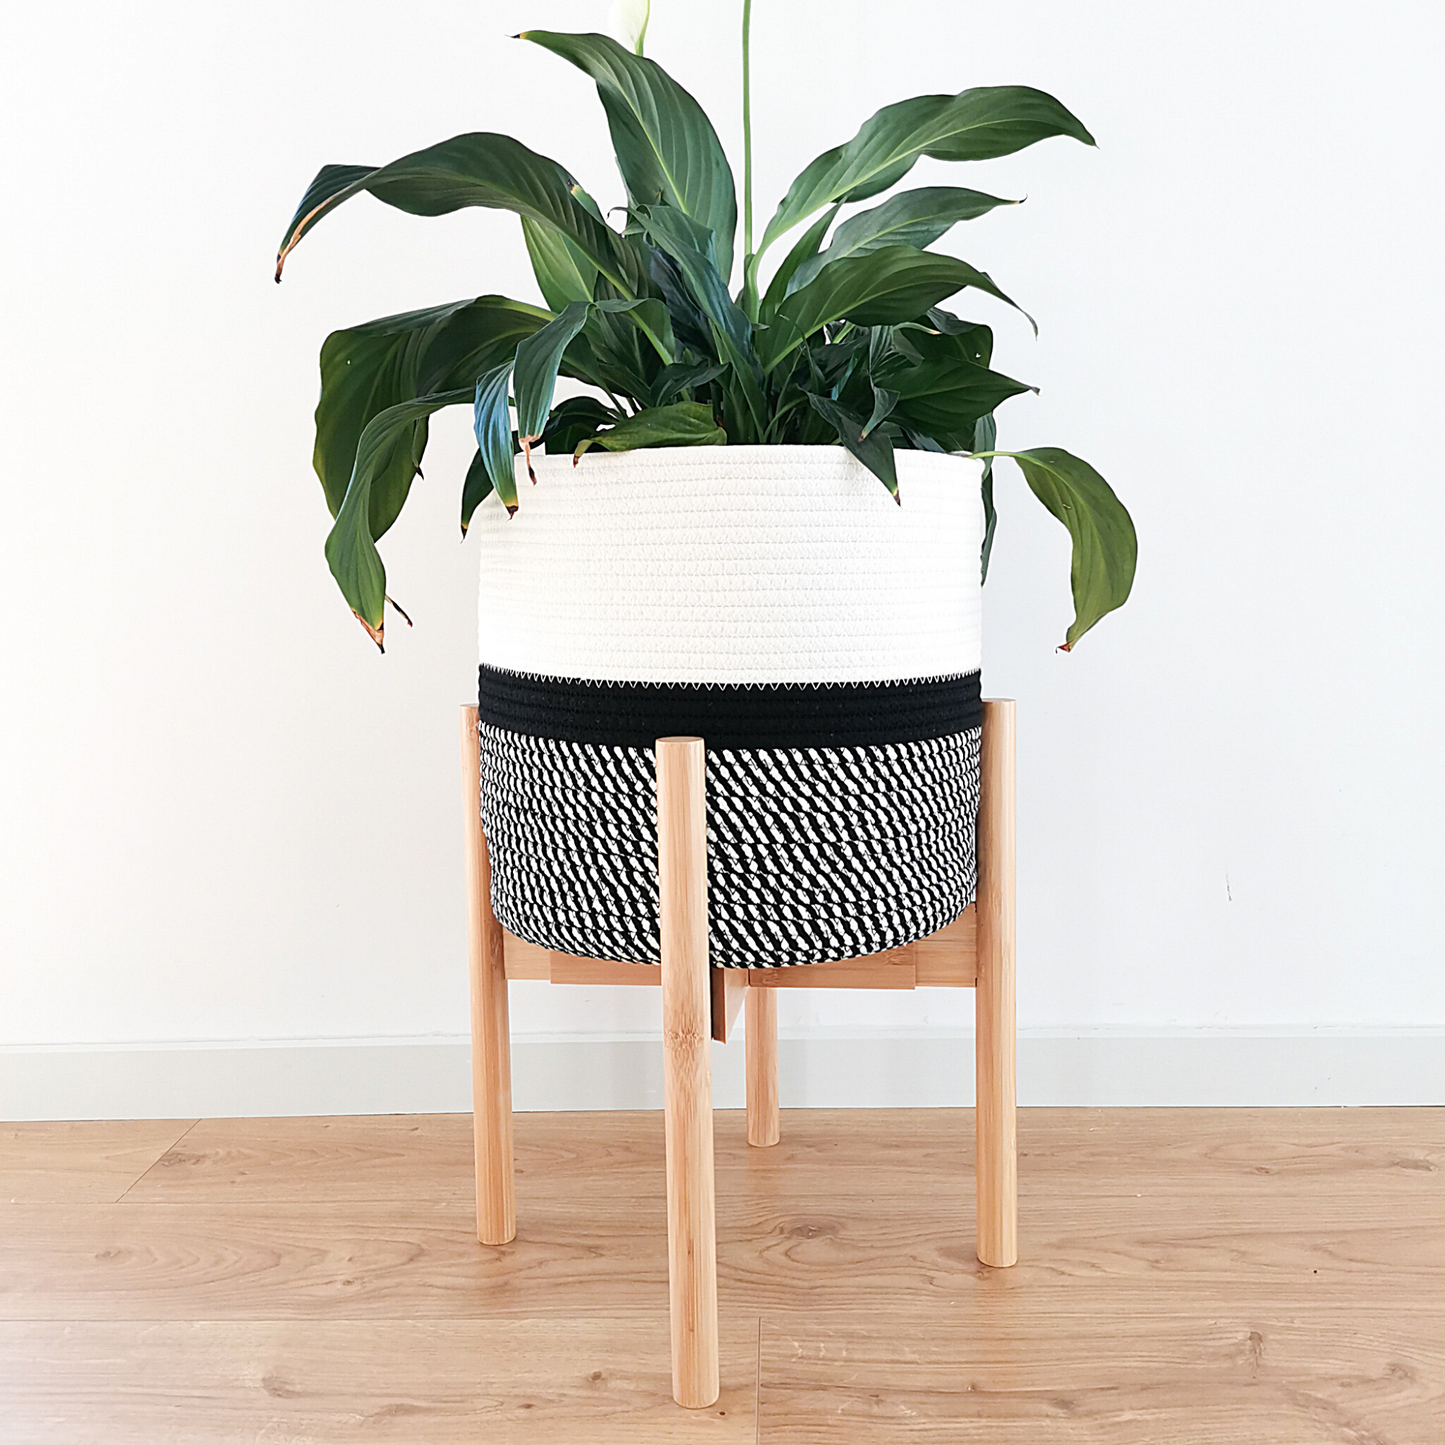 Plant stand and basket made from natural bamboo wood and cotton rope. Perfect for mid-century modern interior.